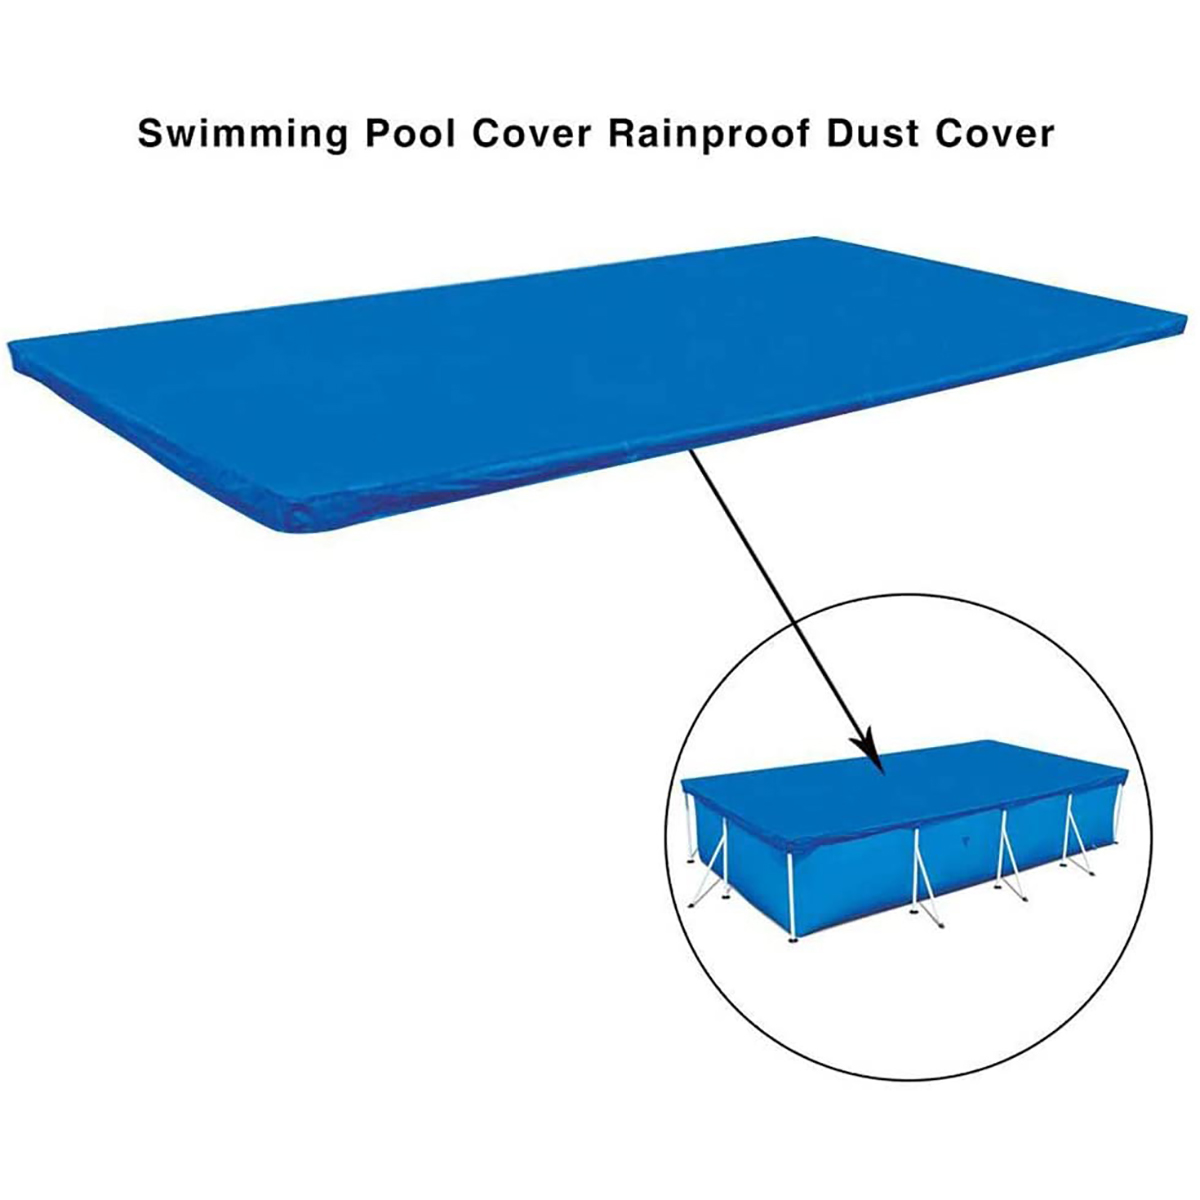 Swimming-Pool-Square-Ground-Cloth-Cover-Dustproof-Waterproof-Anti-ultraviolet-Outdoor-Protection-Flo-1956594-2